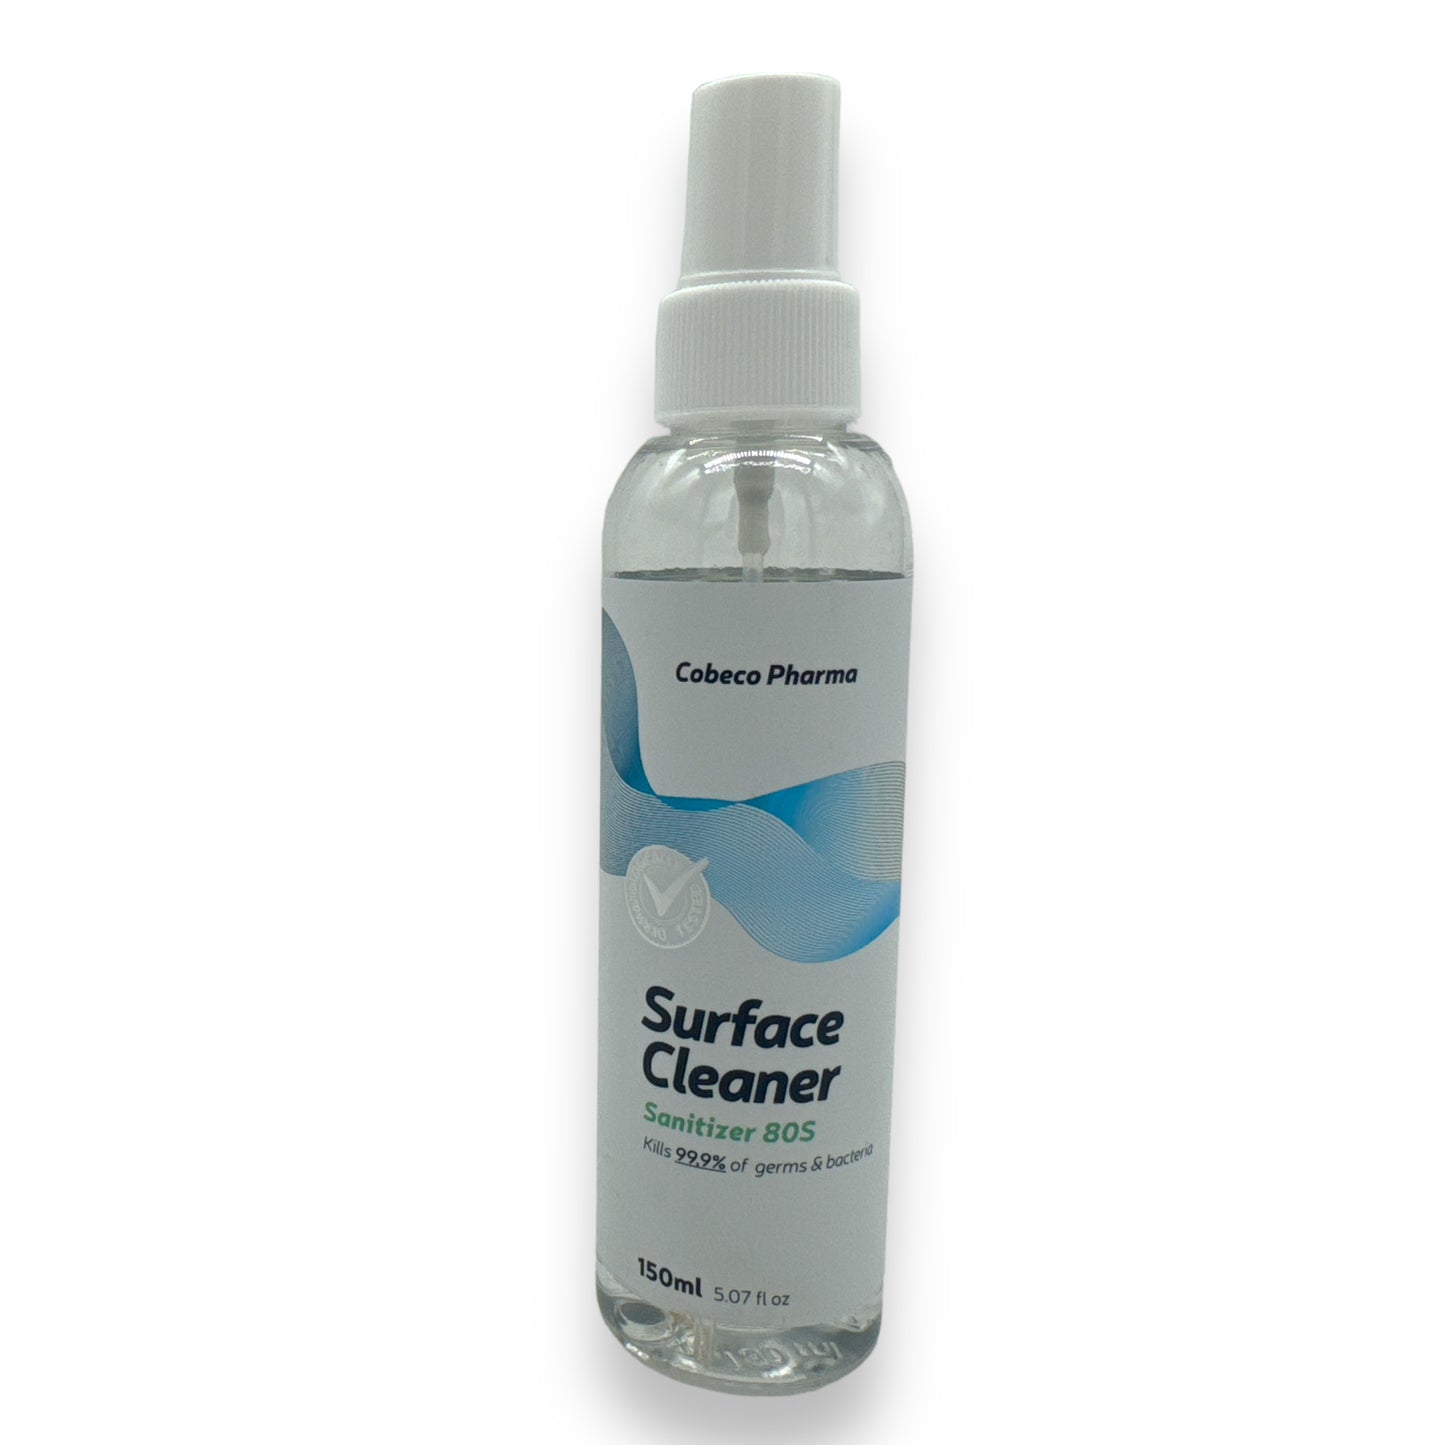 Cobeco - Hygienic Surface Cleaner - Sanitizer 80S - 150ml